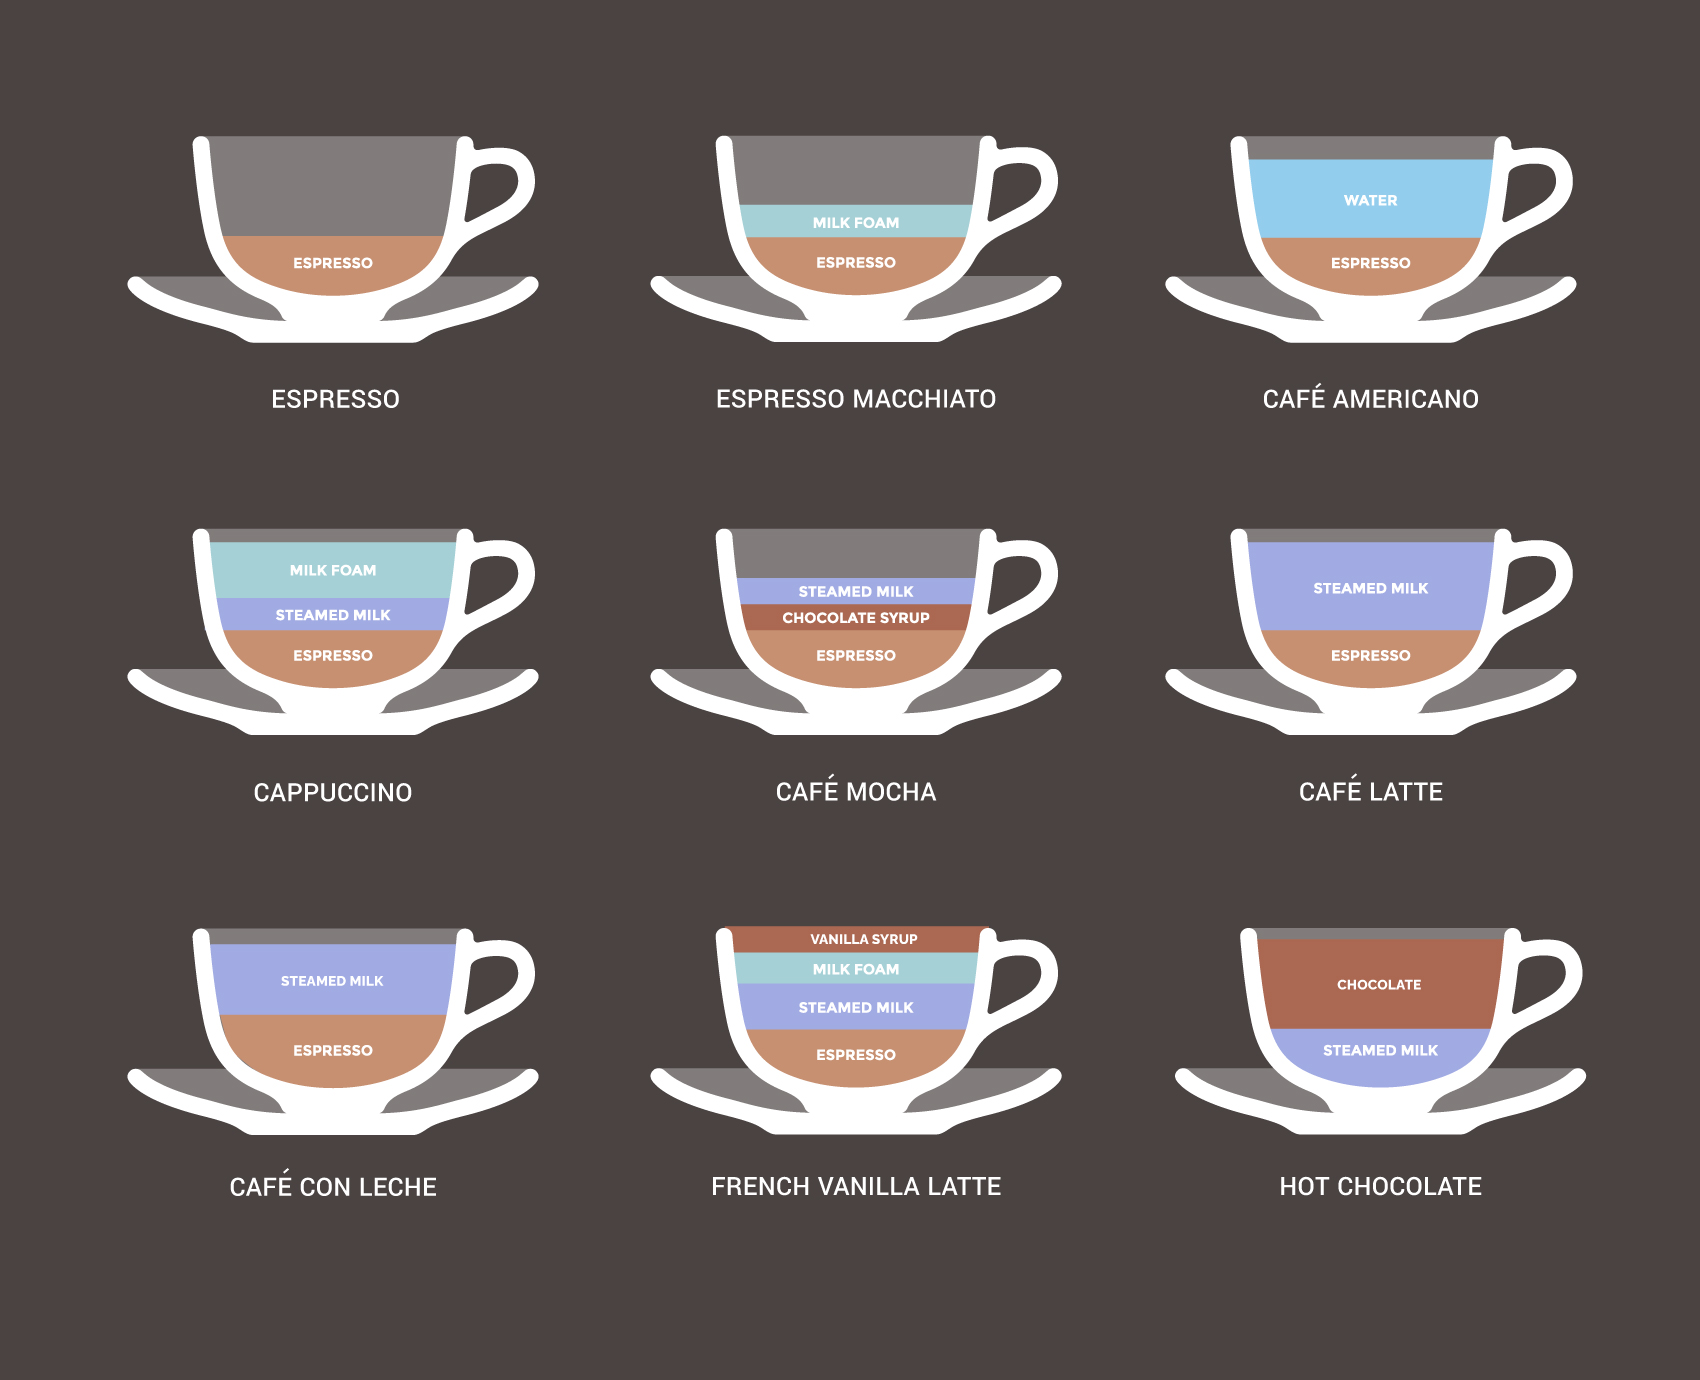 Different types of coffee available through the Vitro S5, graphic